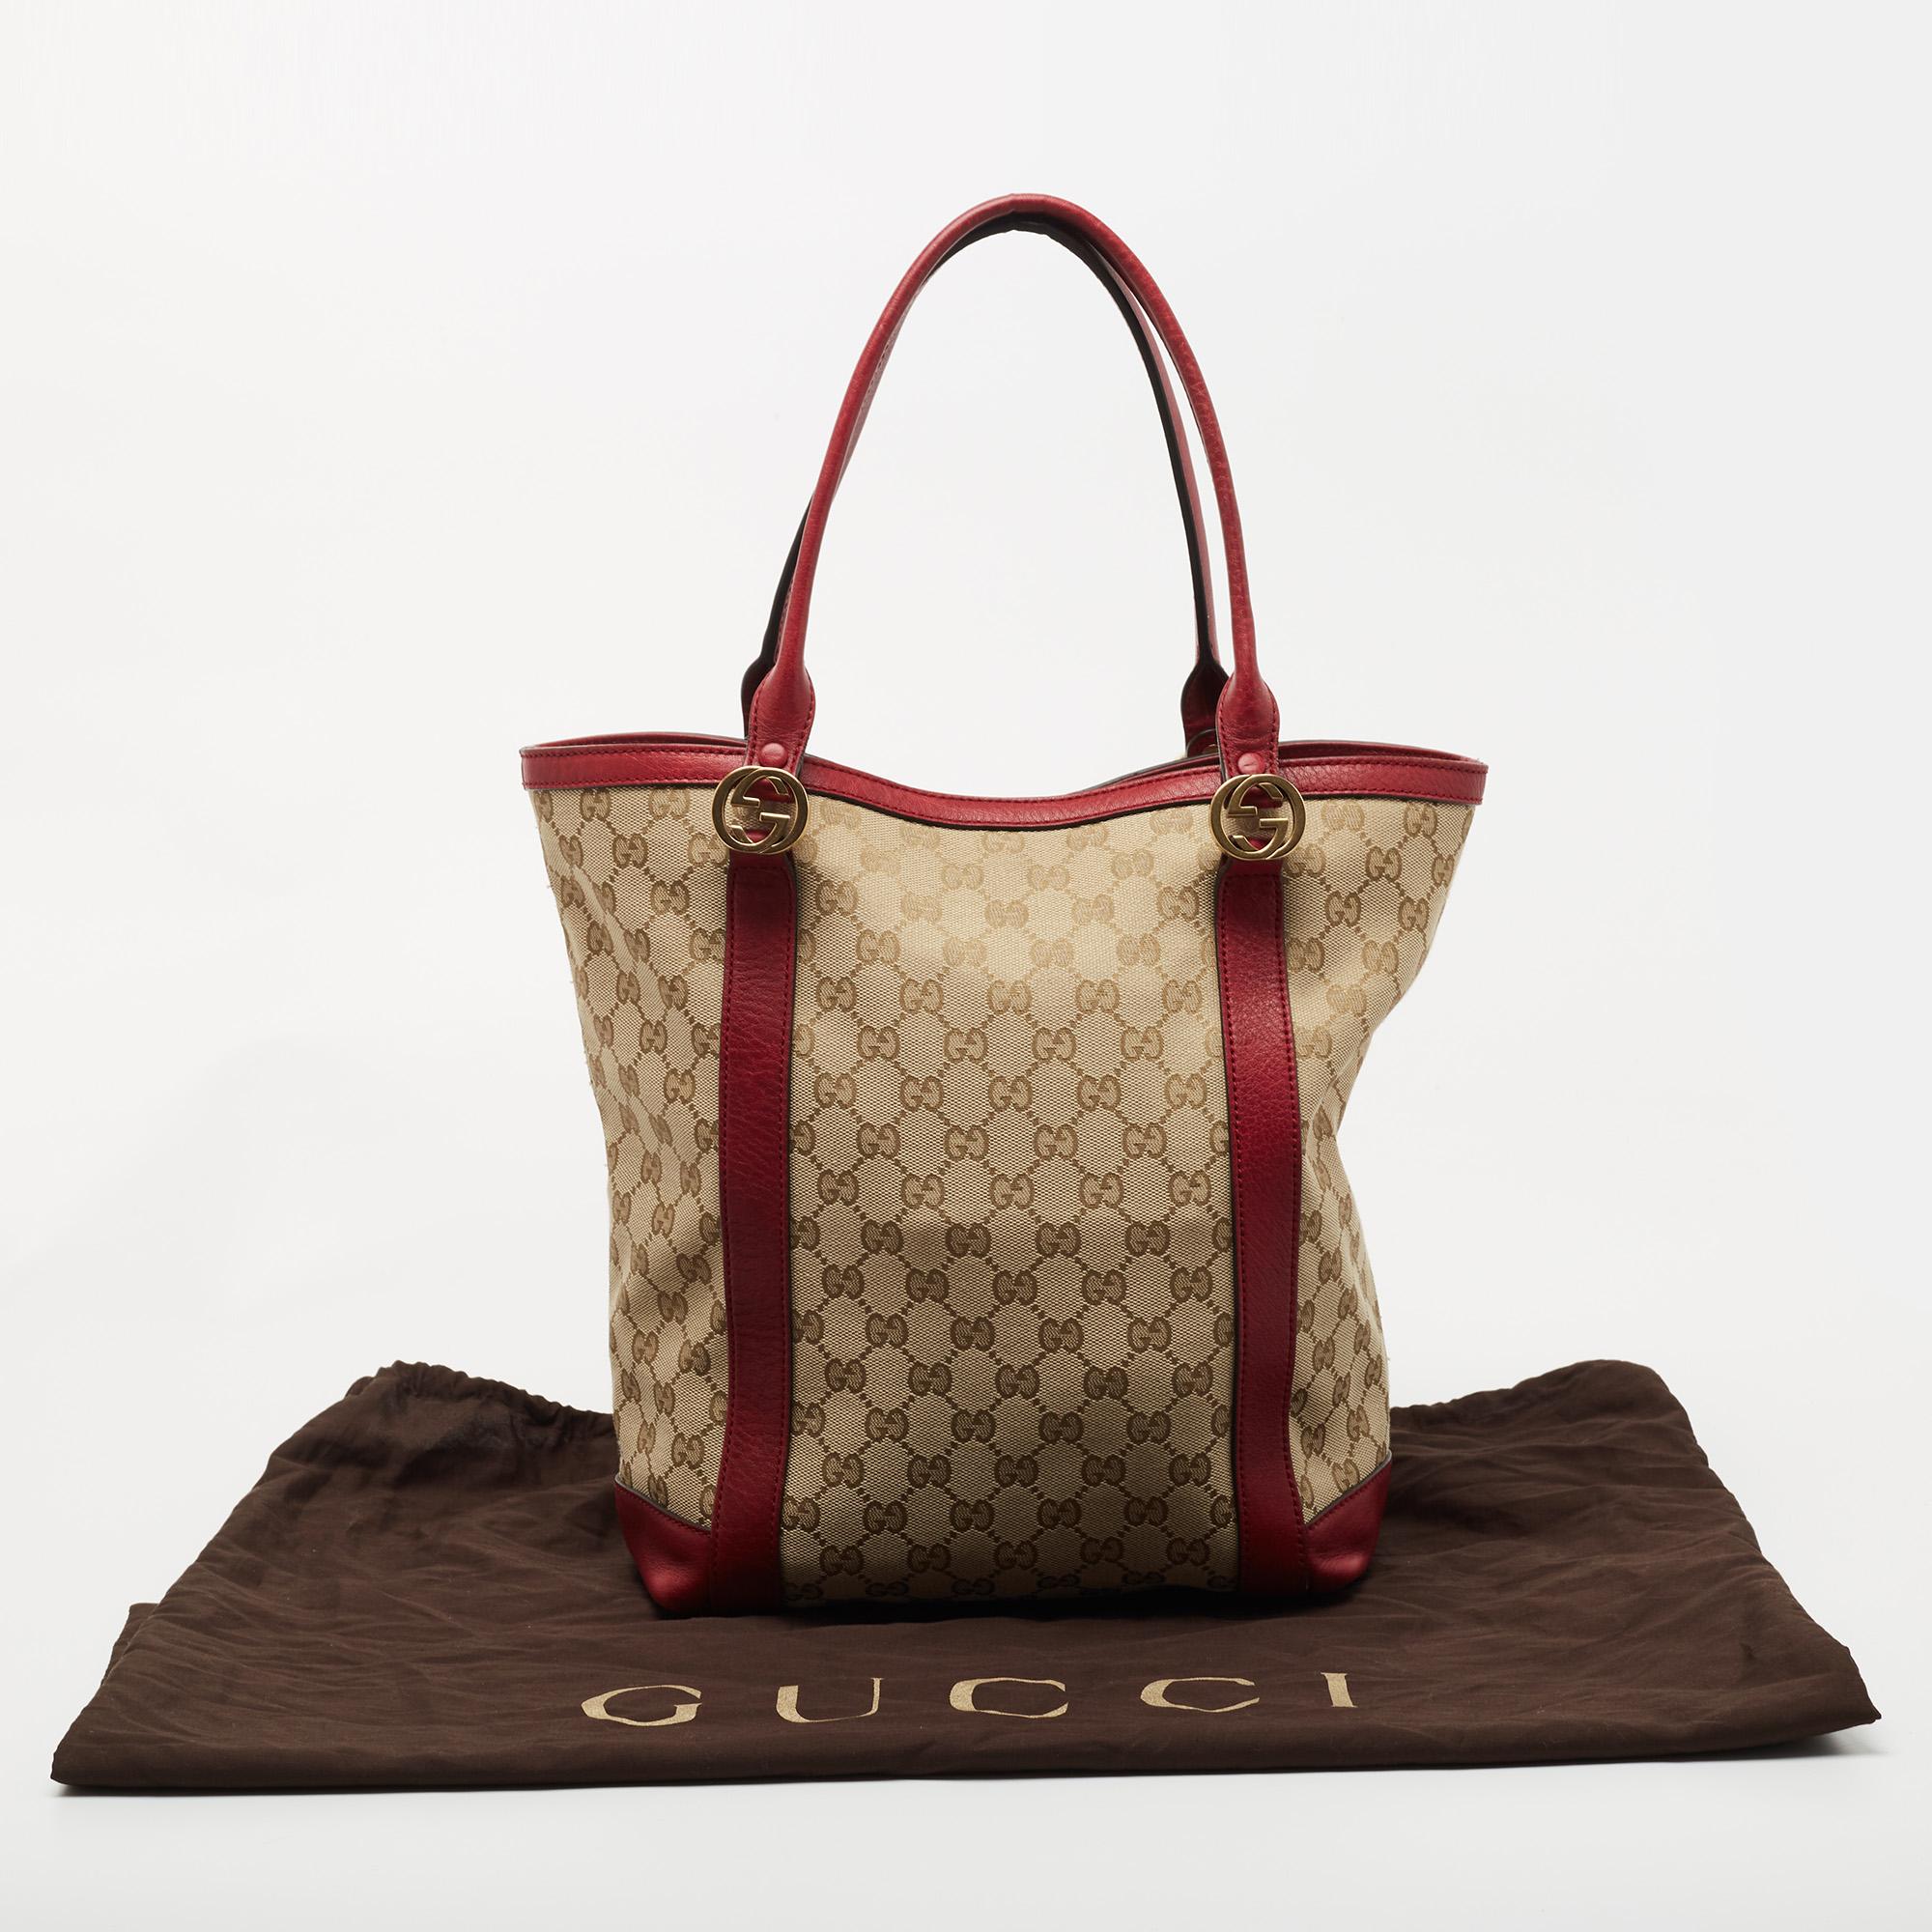 Gucci Beige/Red GG Canvas and Leather GG Interlocking Shopper Tote 8